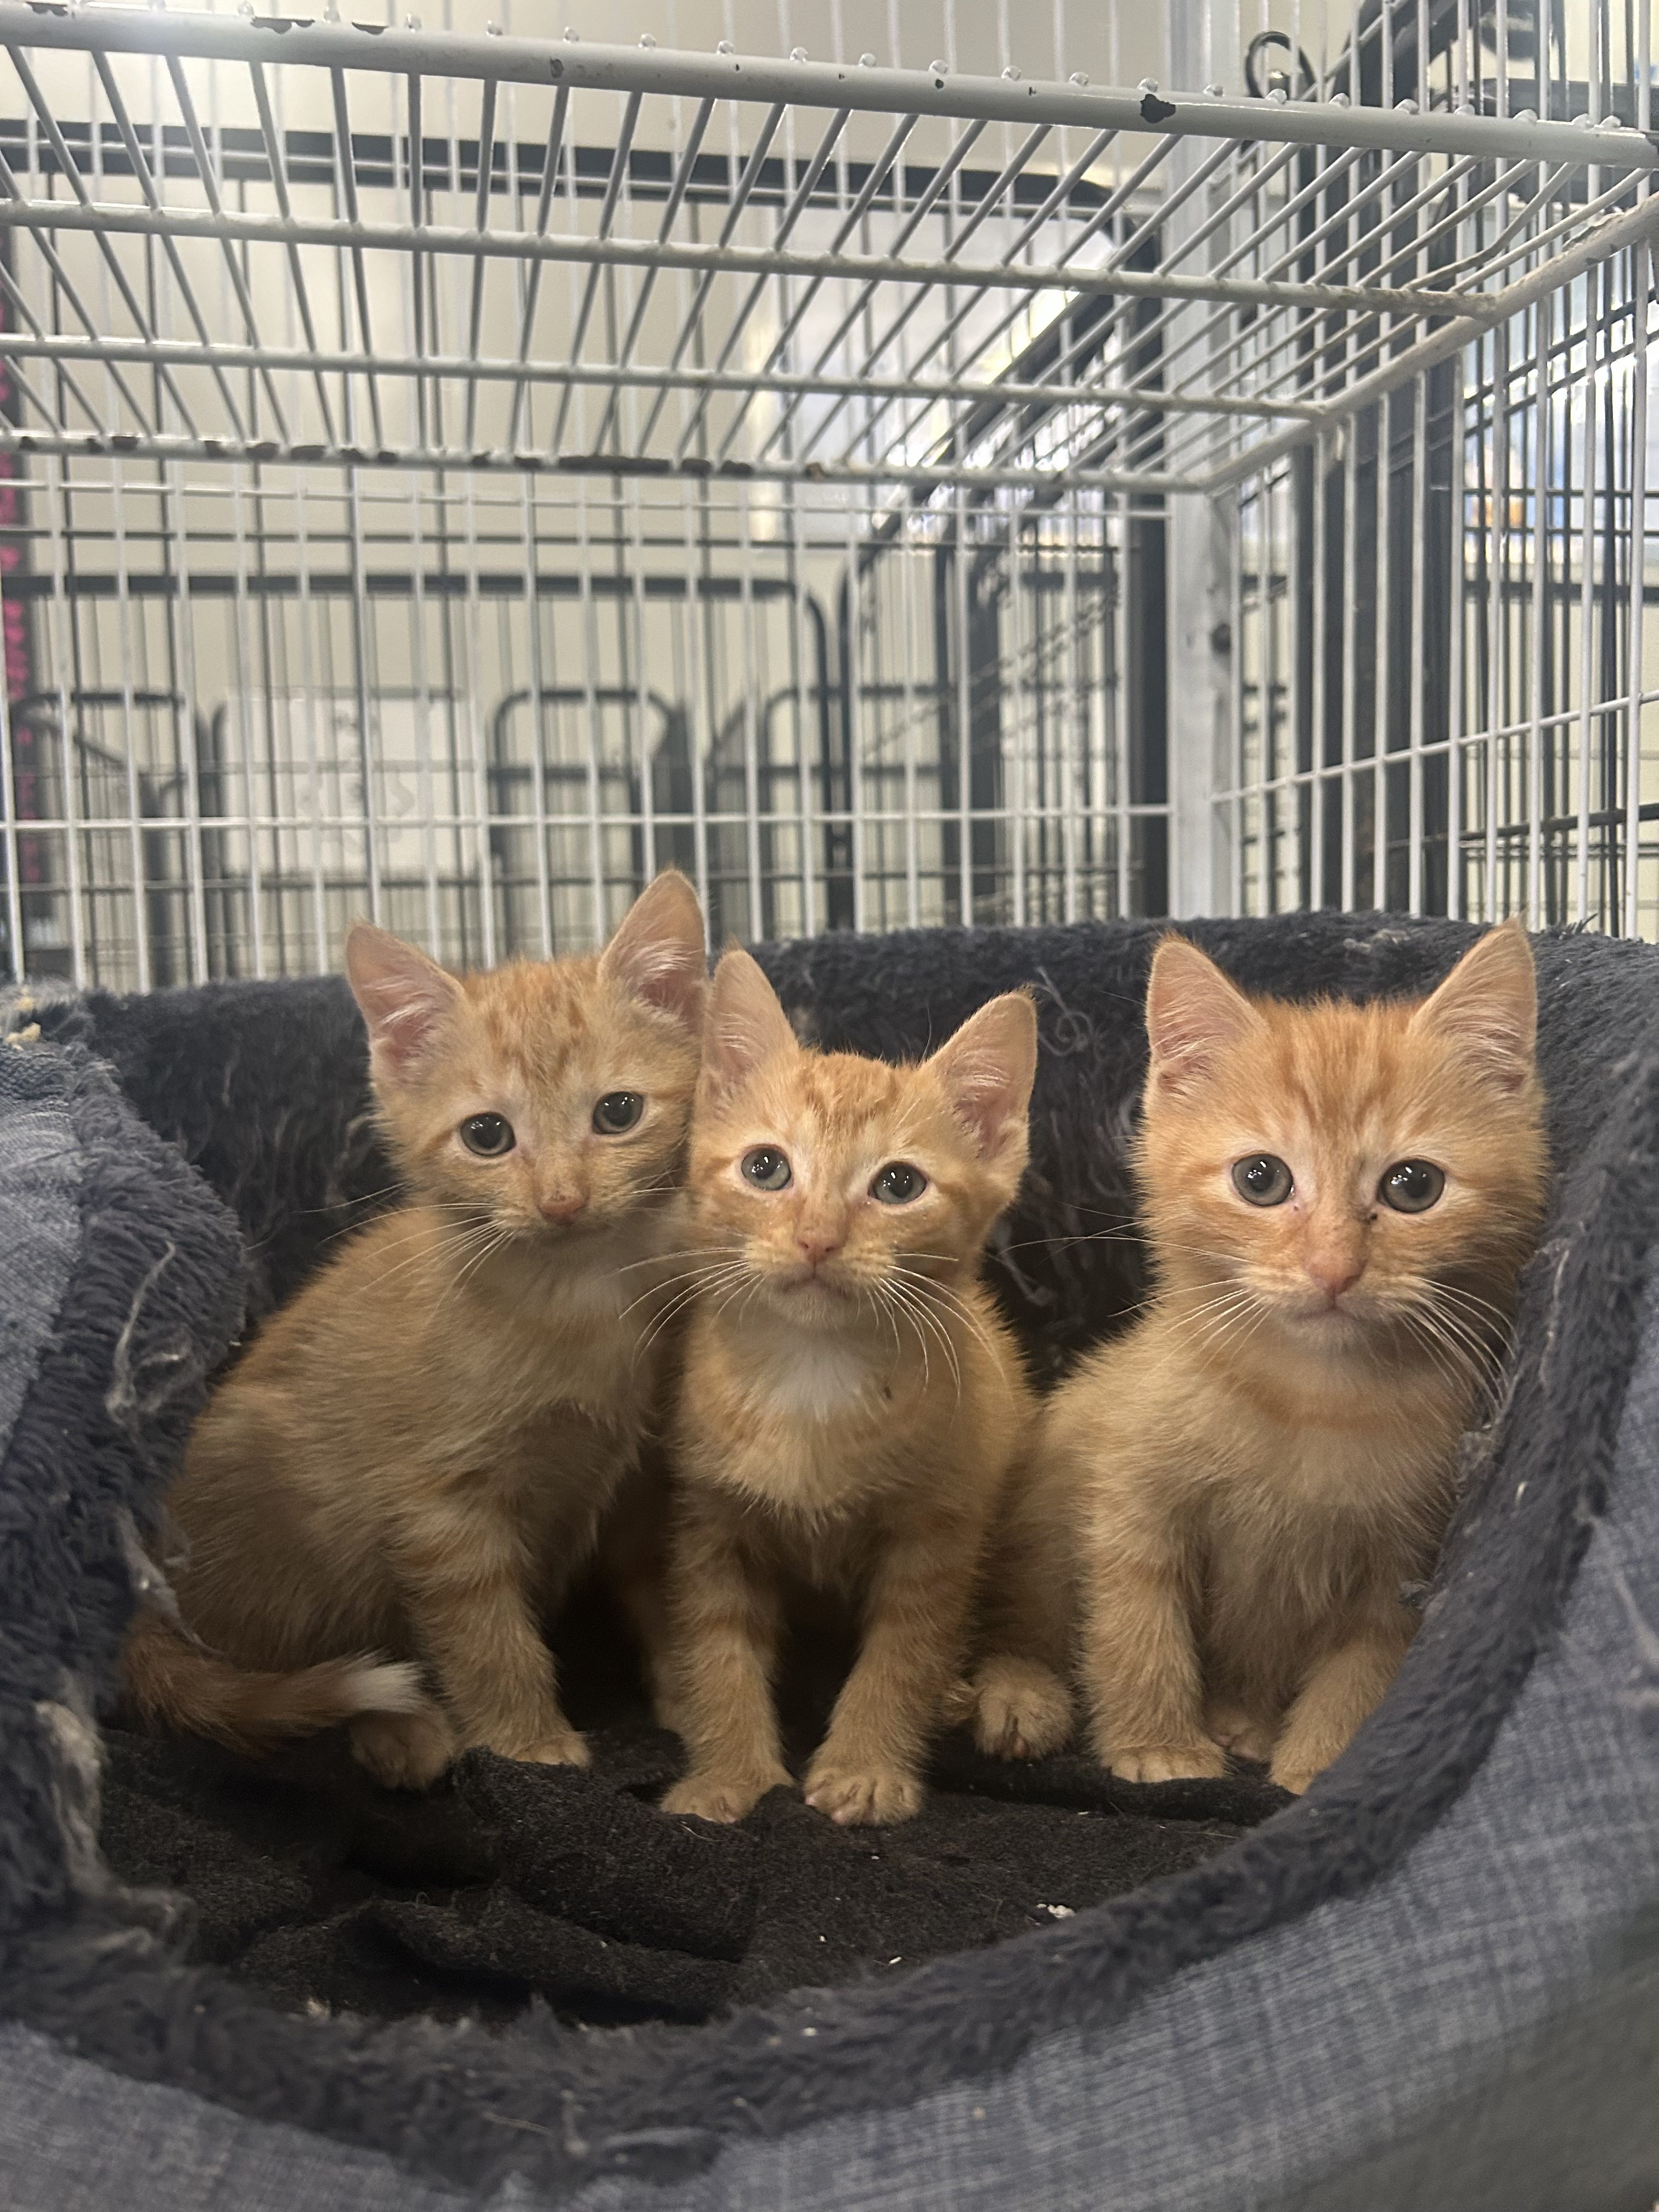 Rescue Kittens for Sale!